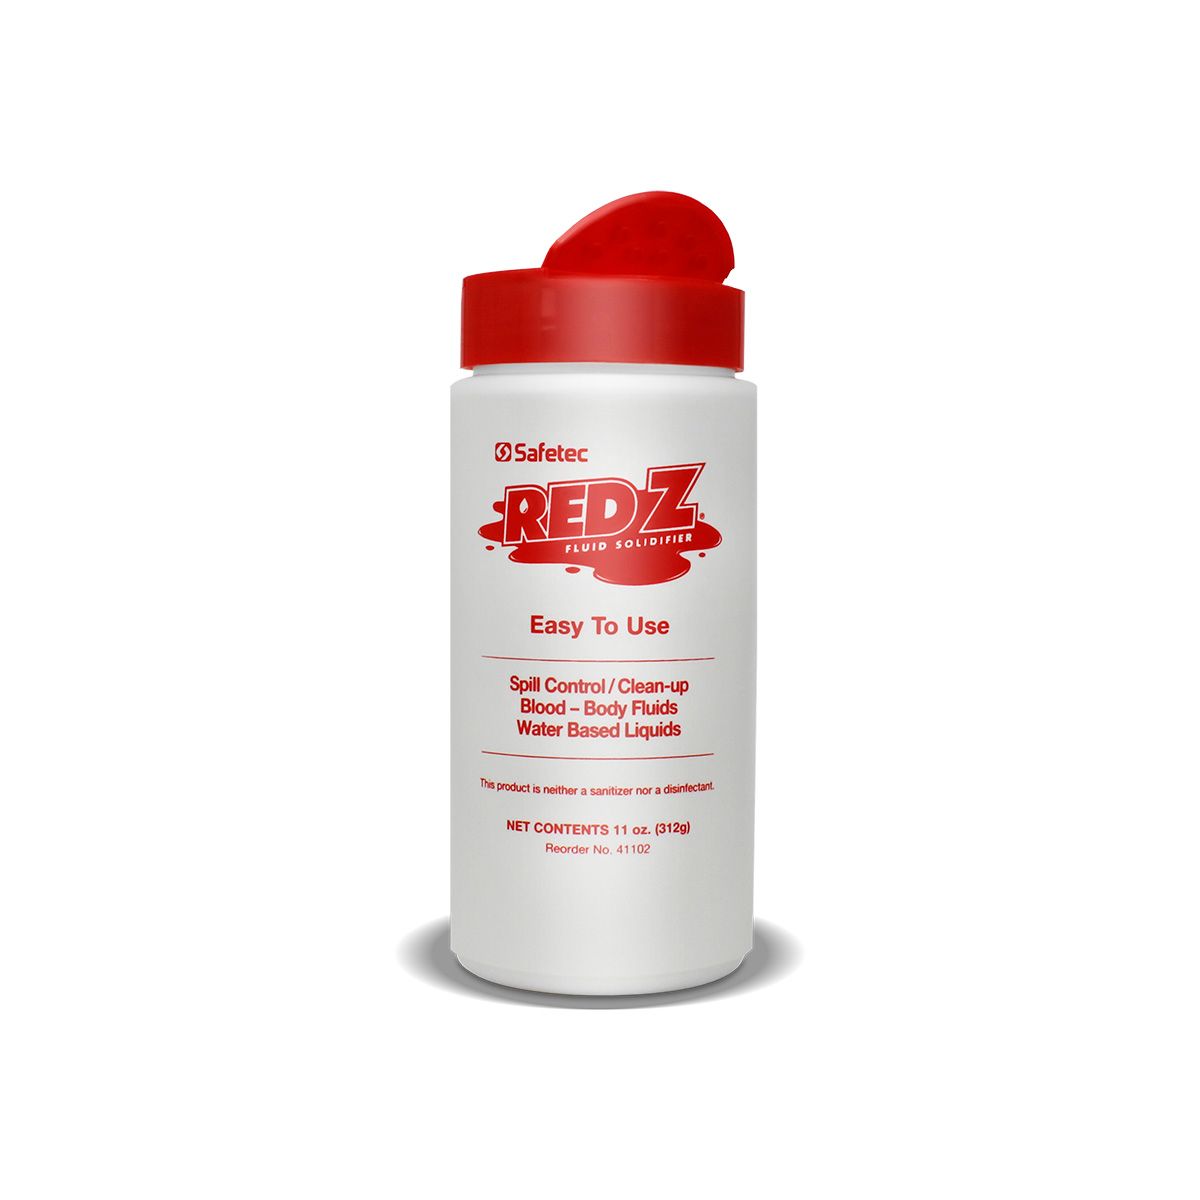 Red Z® Spill Control Solidifier Shaker Top - Infection and Spill Control